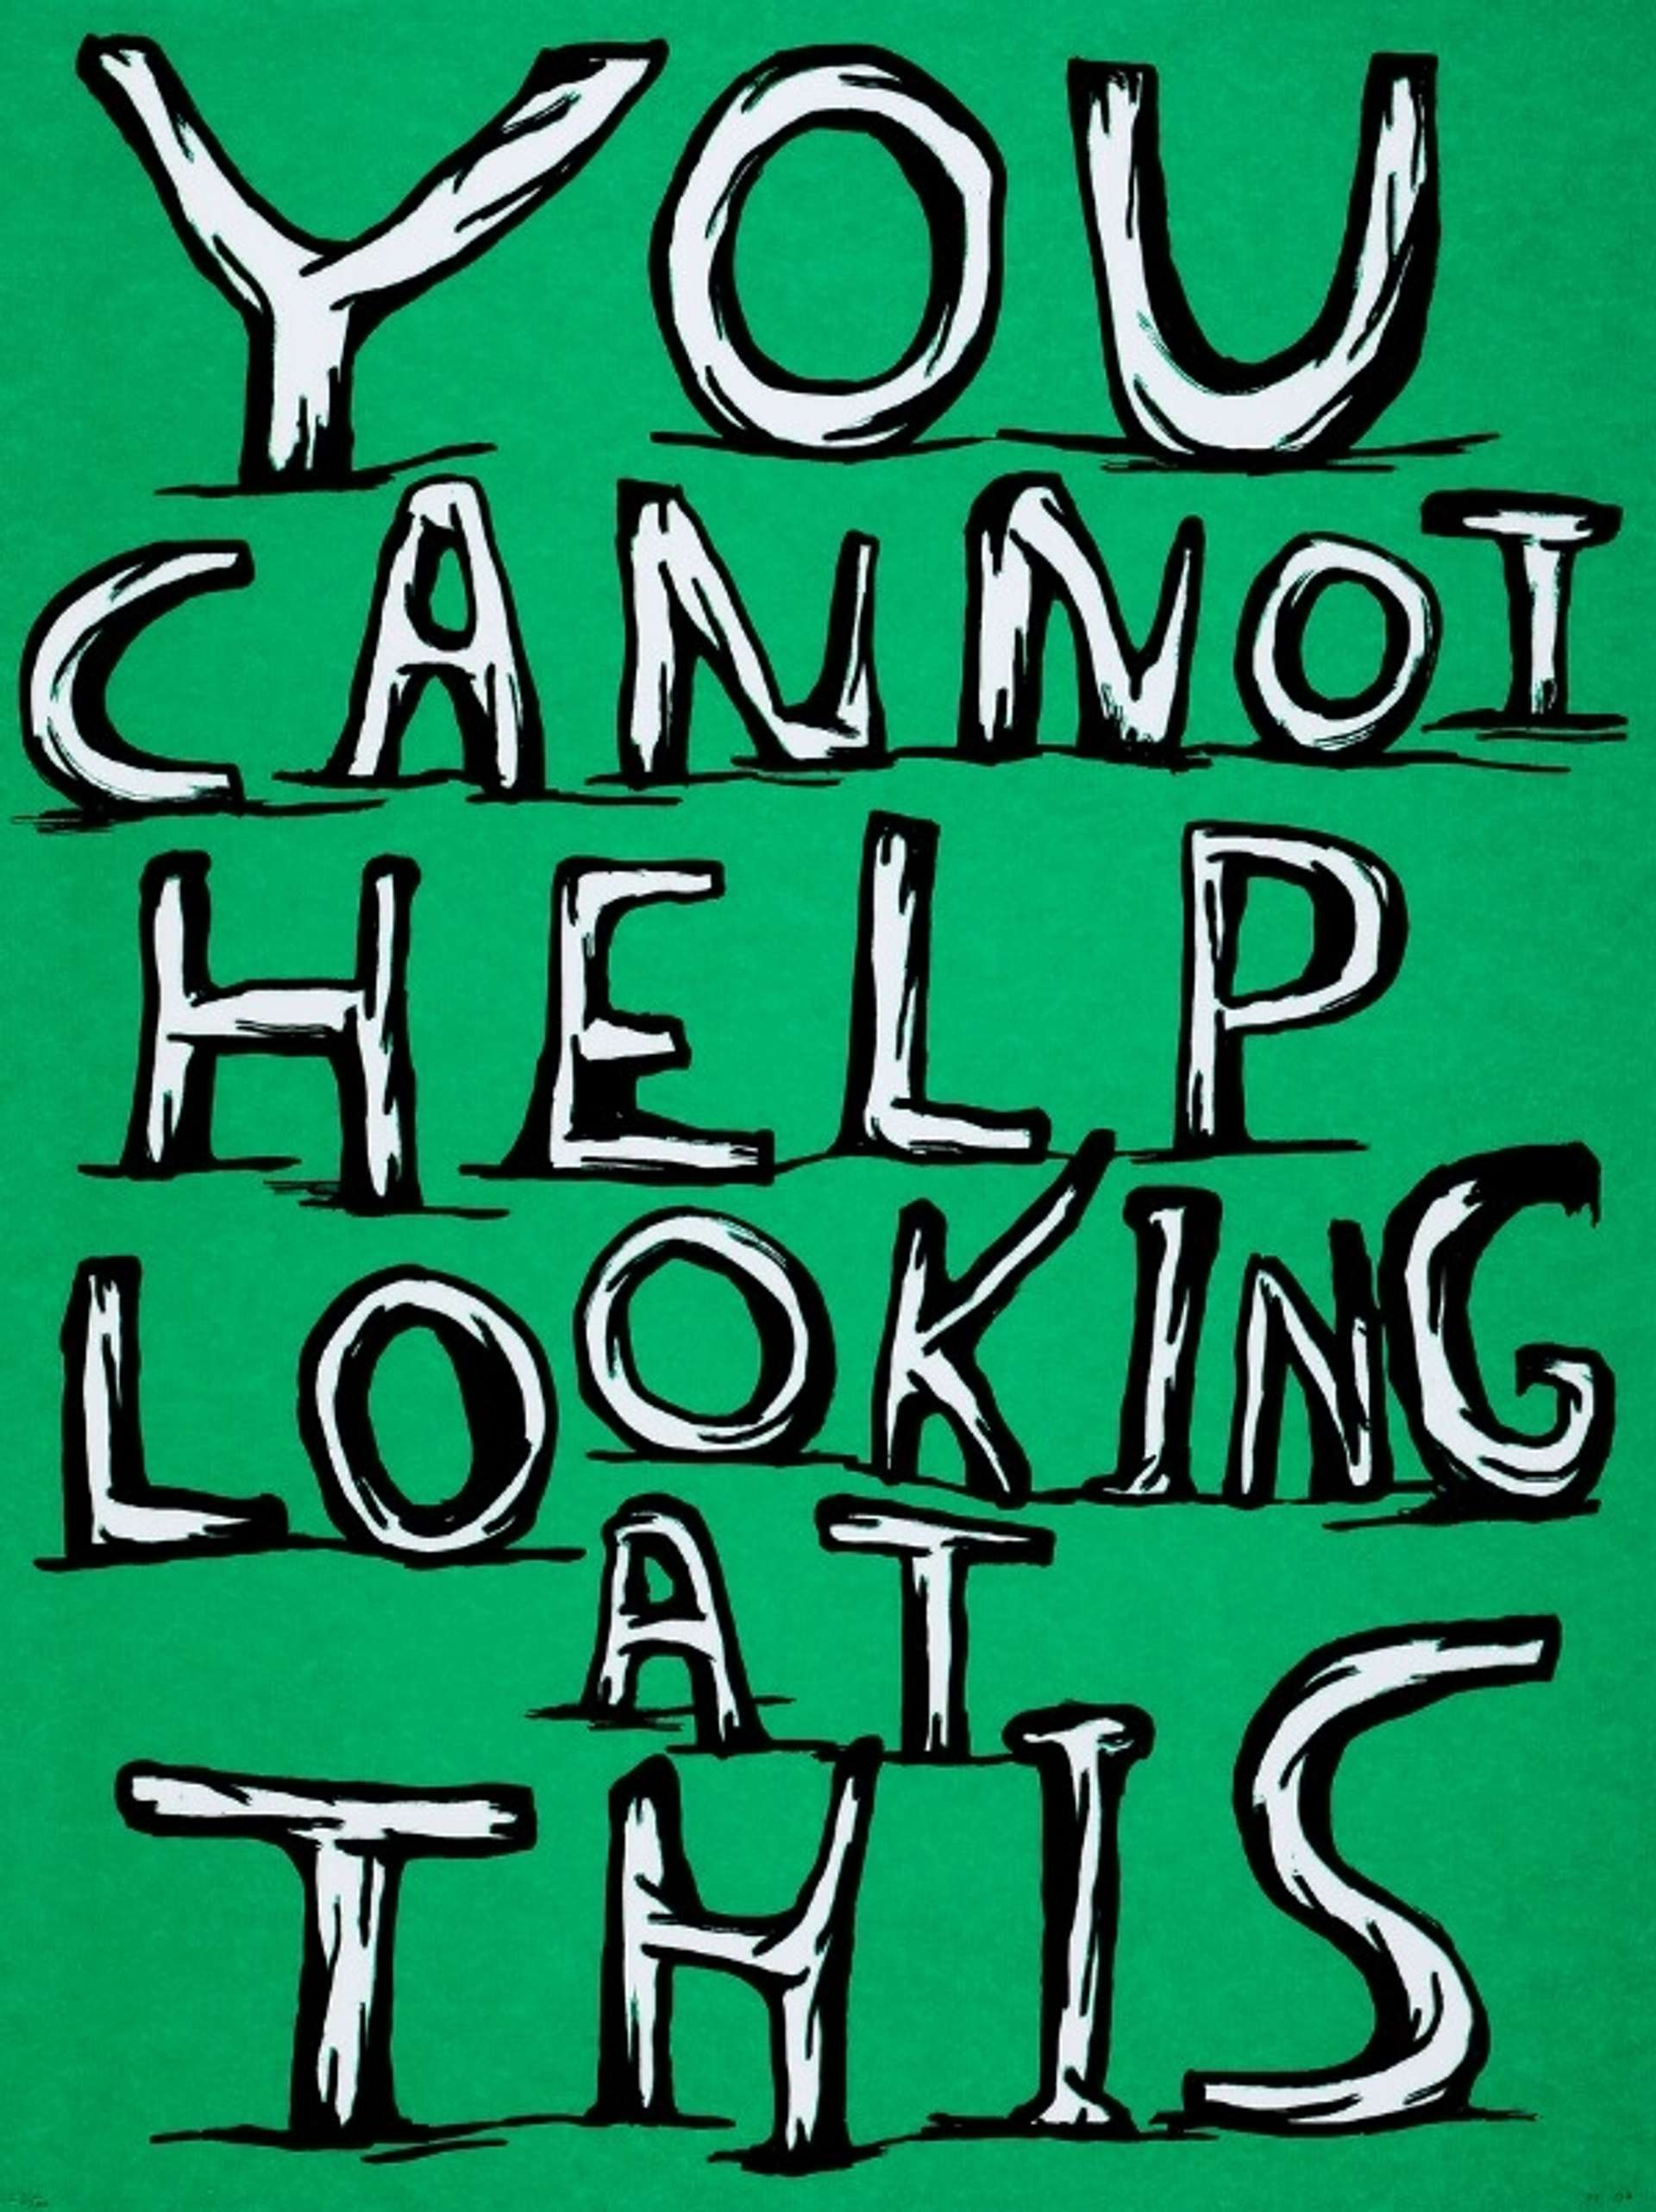 Untitled (You Cannot Help Looking At This) - Signed Print by David Shrigley 2007 - MyArtBroker